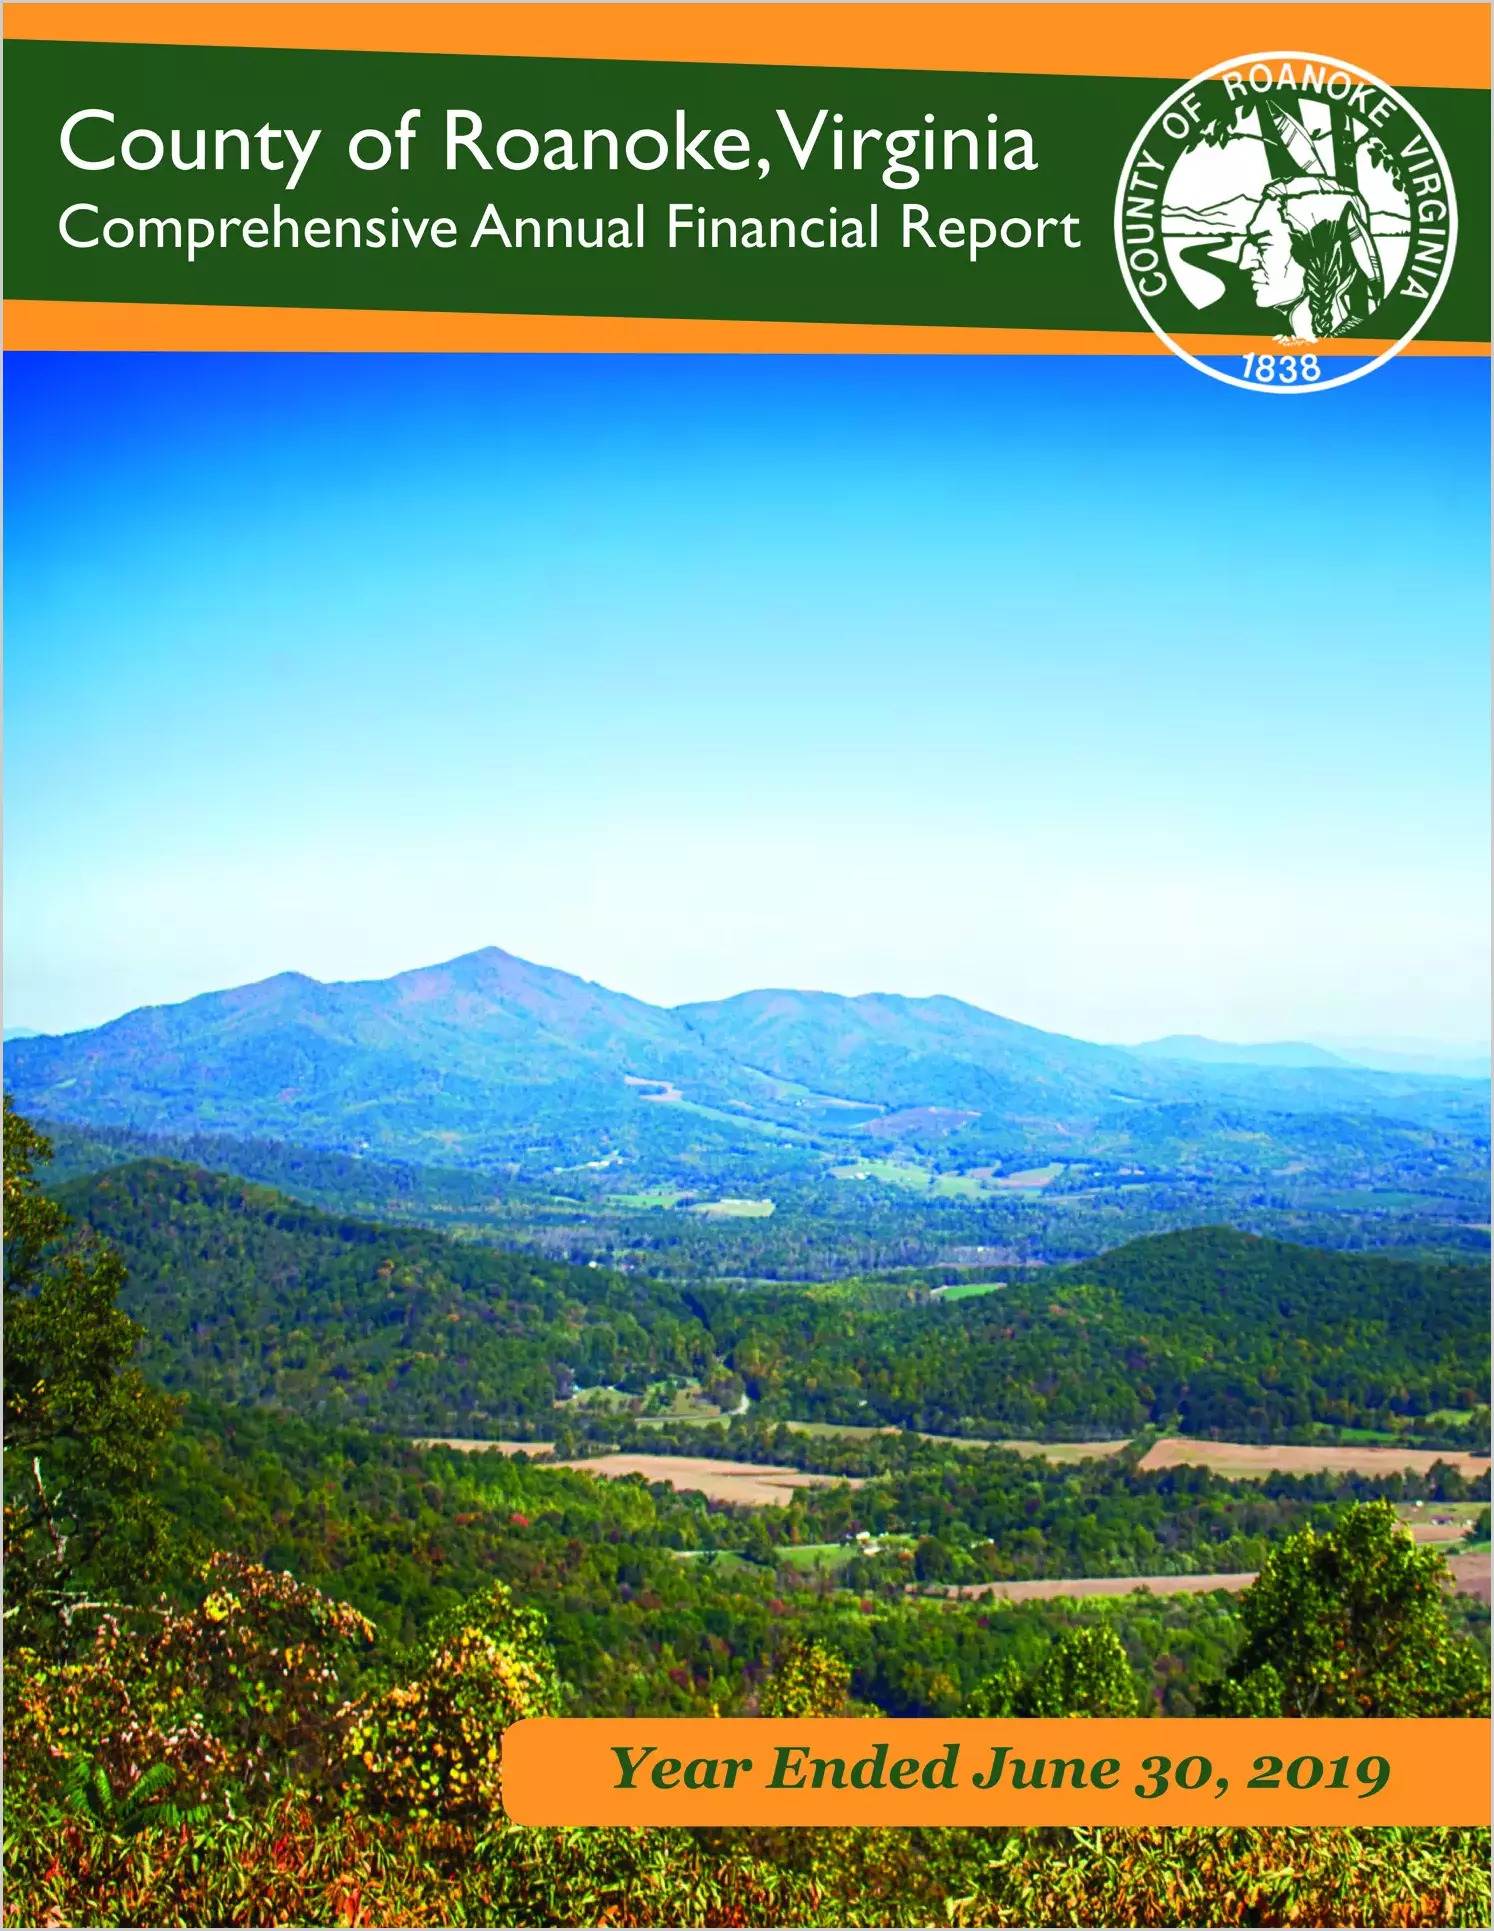 2019 Annual Financial Report for County of Roanoke